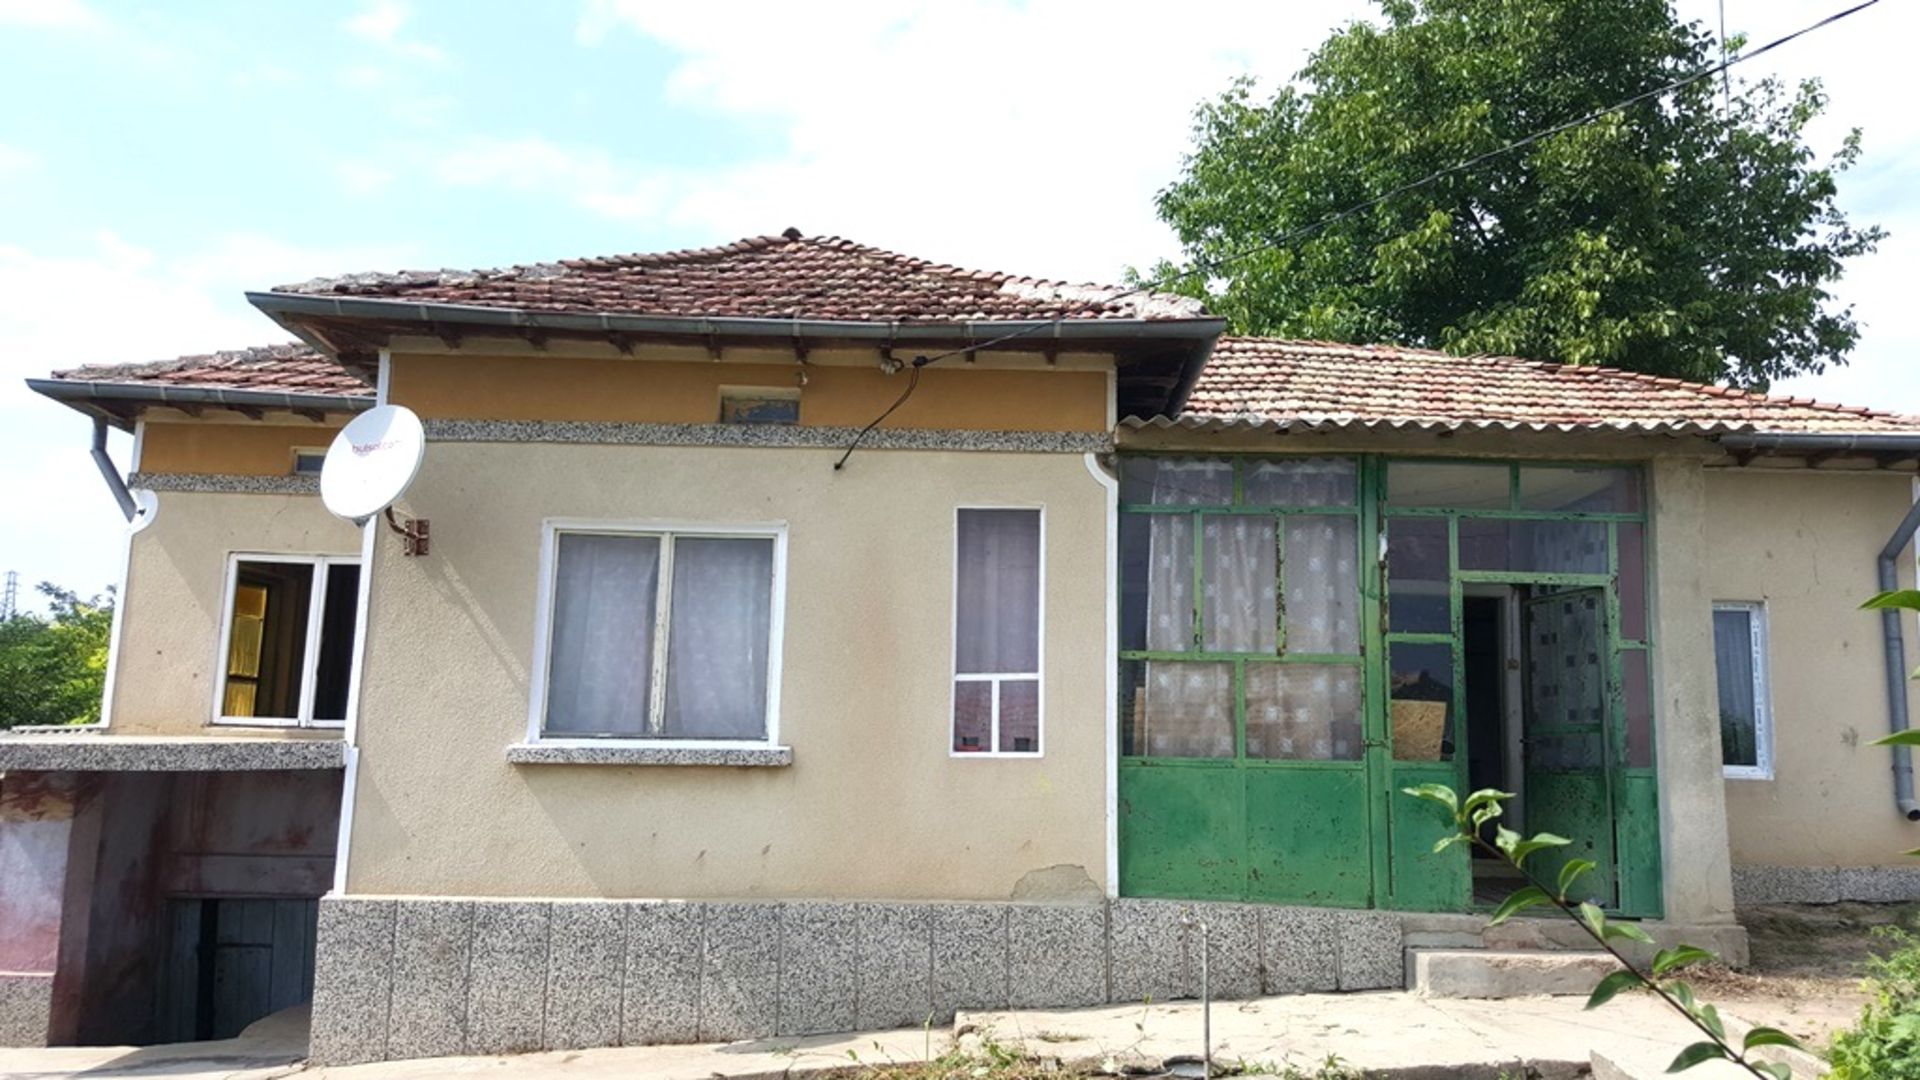 SUNFLOWER COTTAGE IN KRASEN, BULGARIA  - 30 miles from Beach! - Image 2 of 64